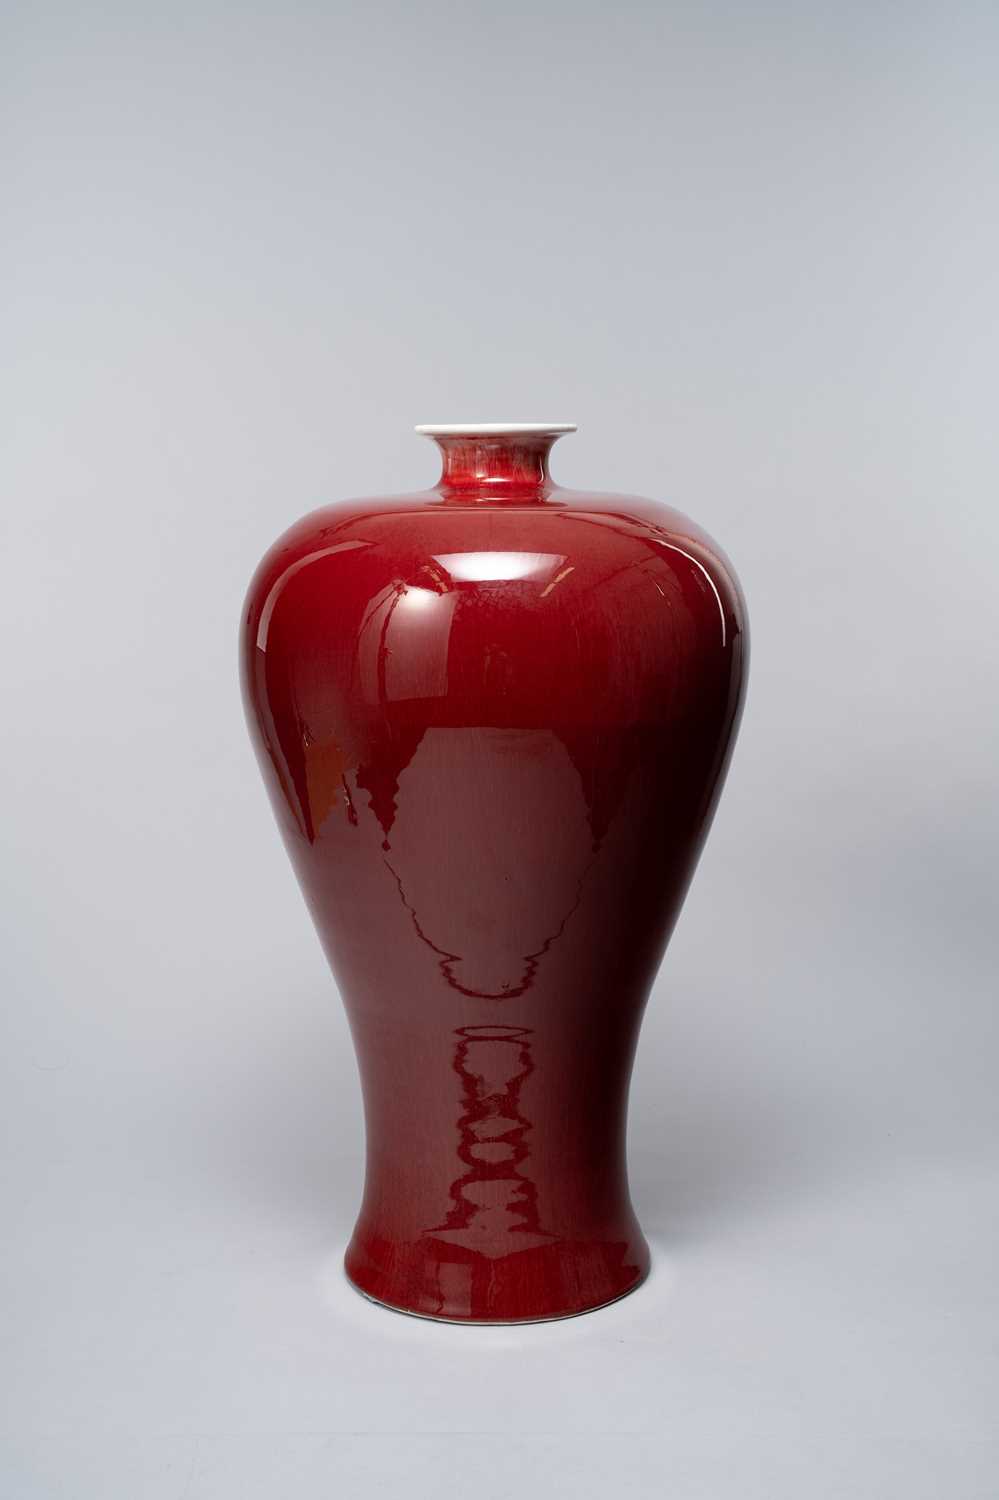 NO RESERVE A MASSIVE CHINESE FLAMBE-GLAZED MEIPING 20TH CENTURY Boldly modelled with the glaze